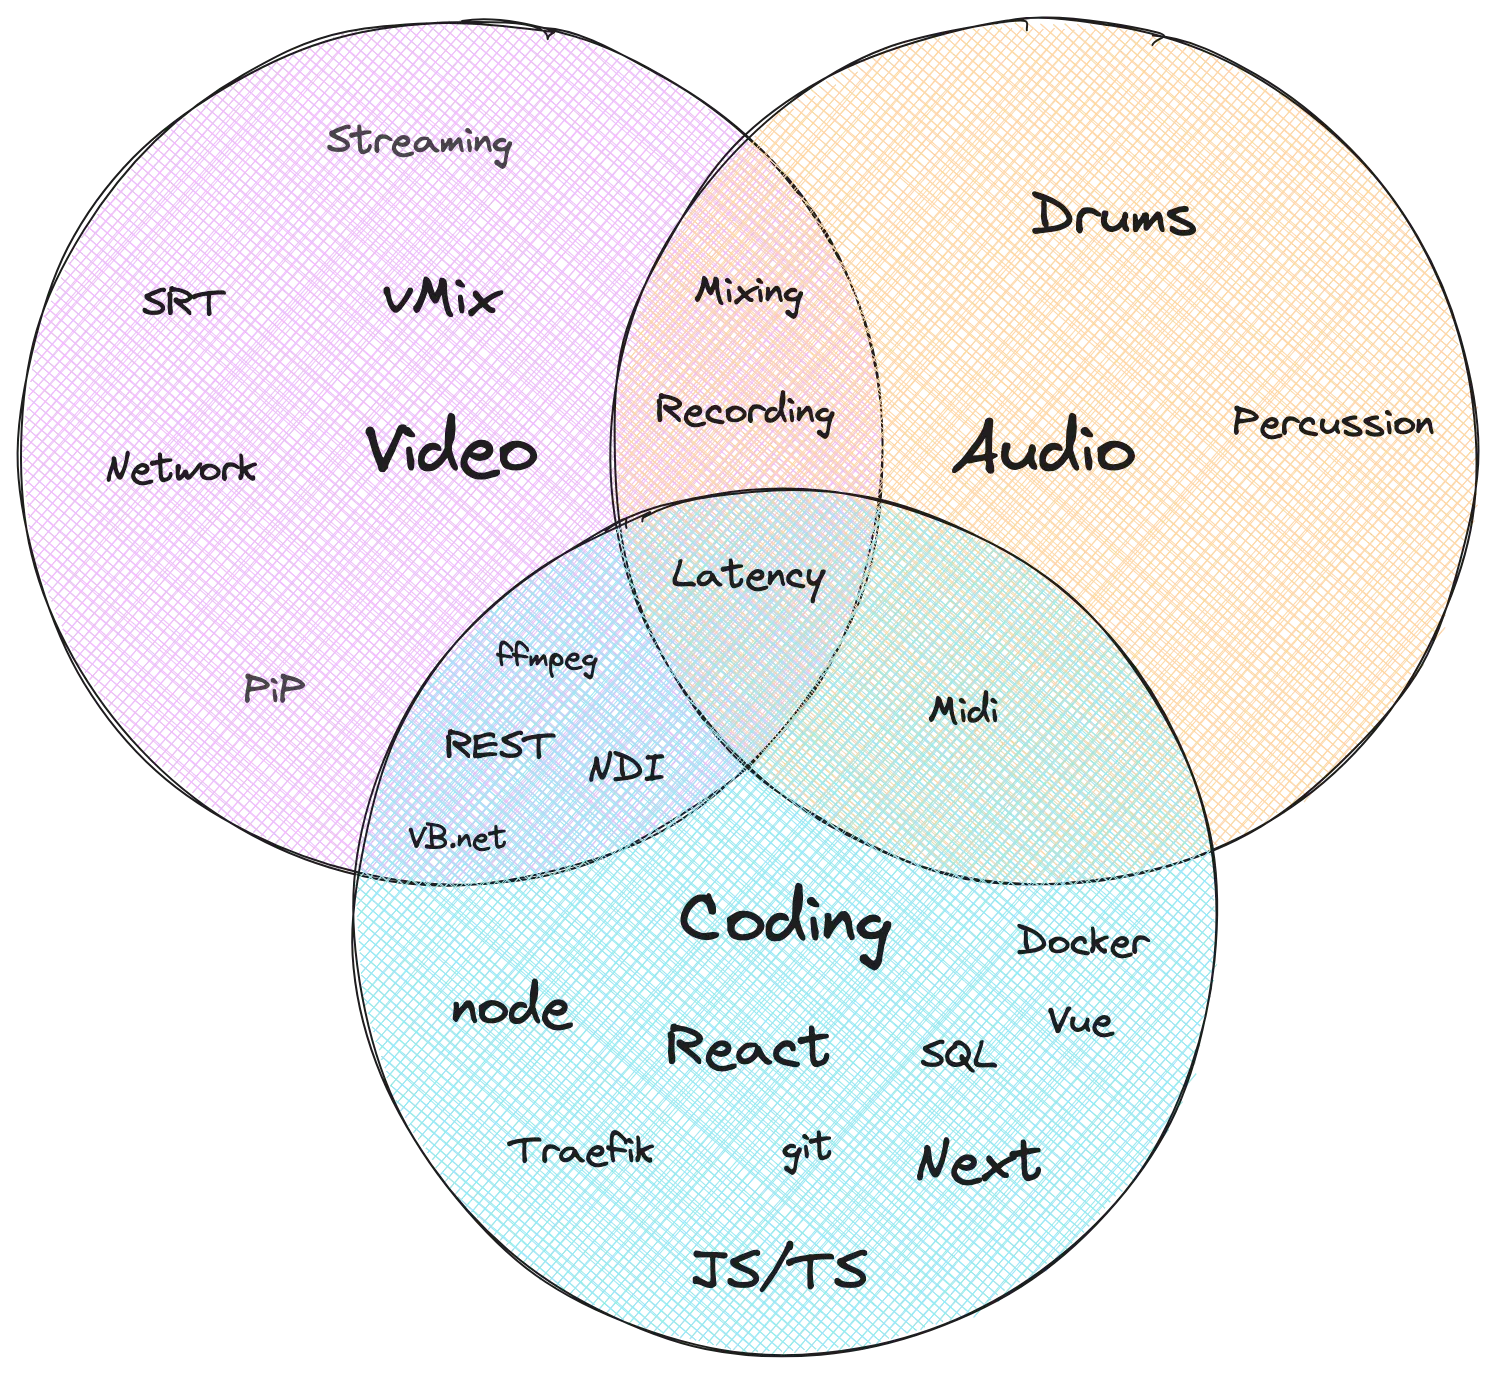 A Venn diagramm of my skillset. Follow the link below it to see an accessible table instead.